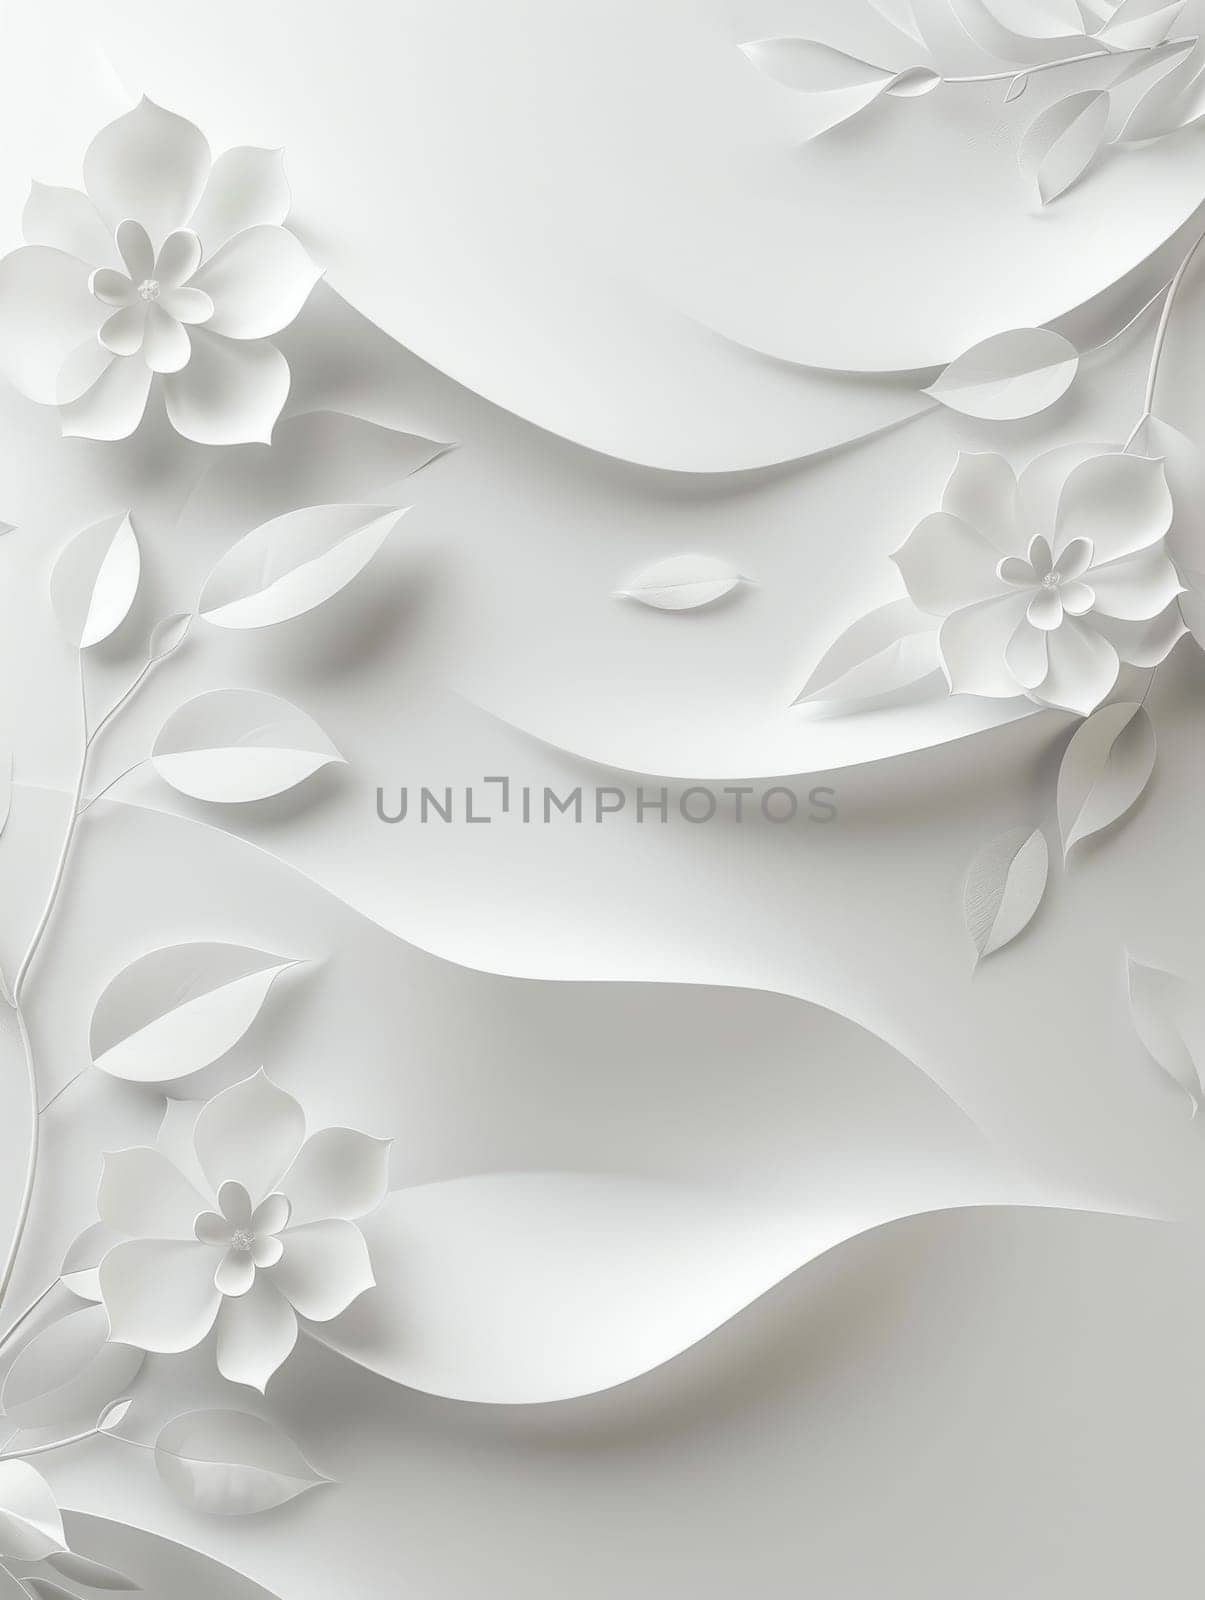 A white background with a flowery design. The flowers are white and the leaves are also white. The design is very intricate and detailed